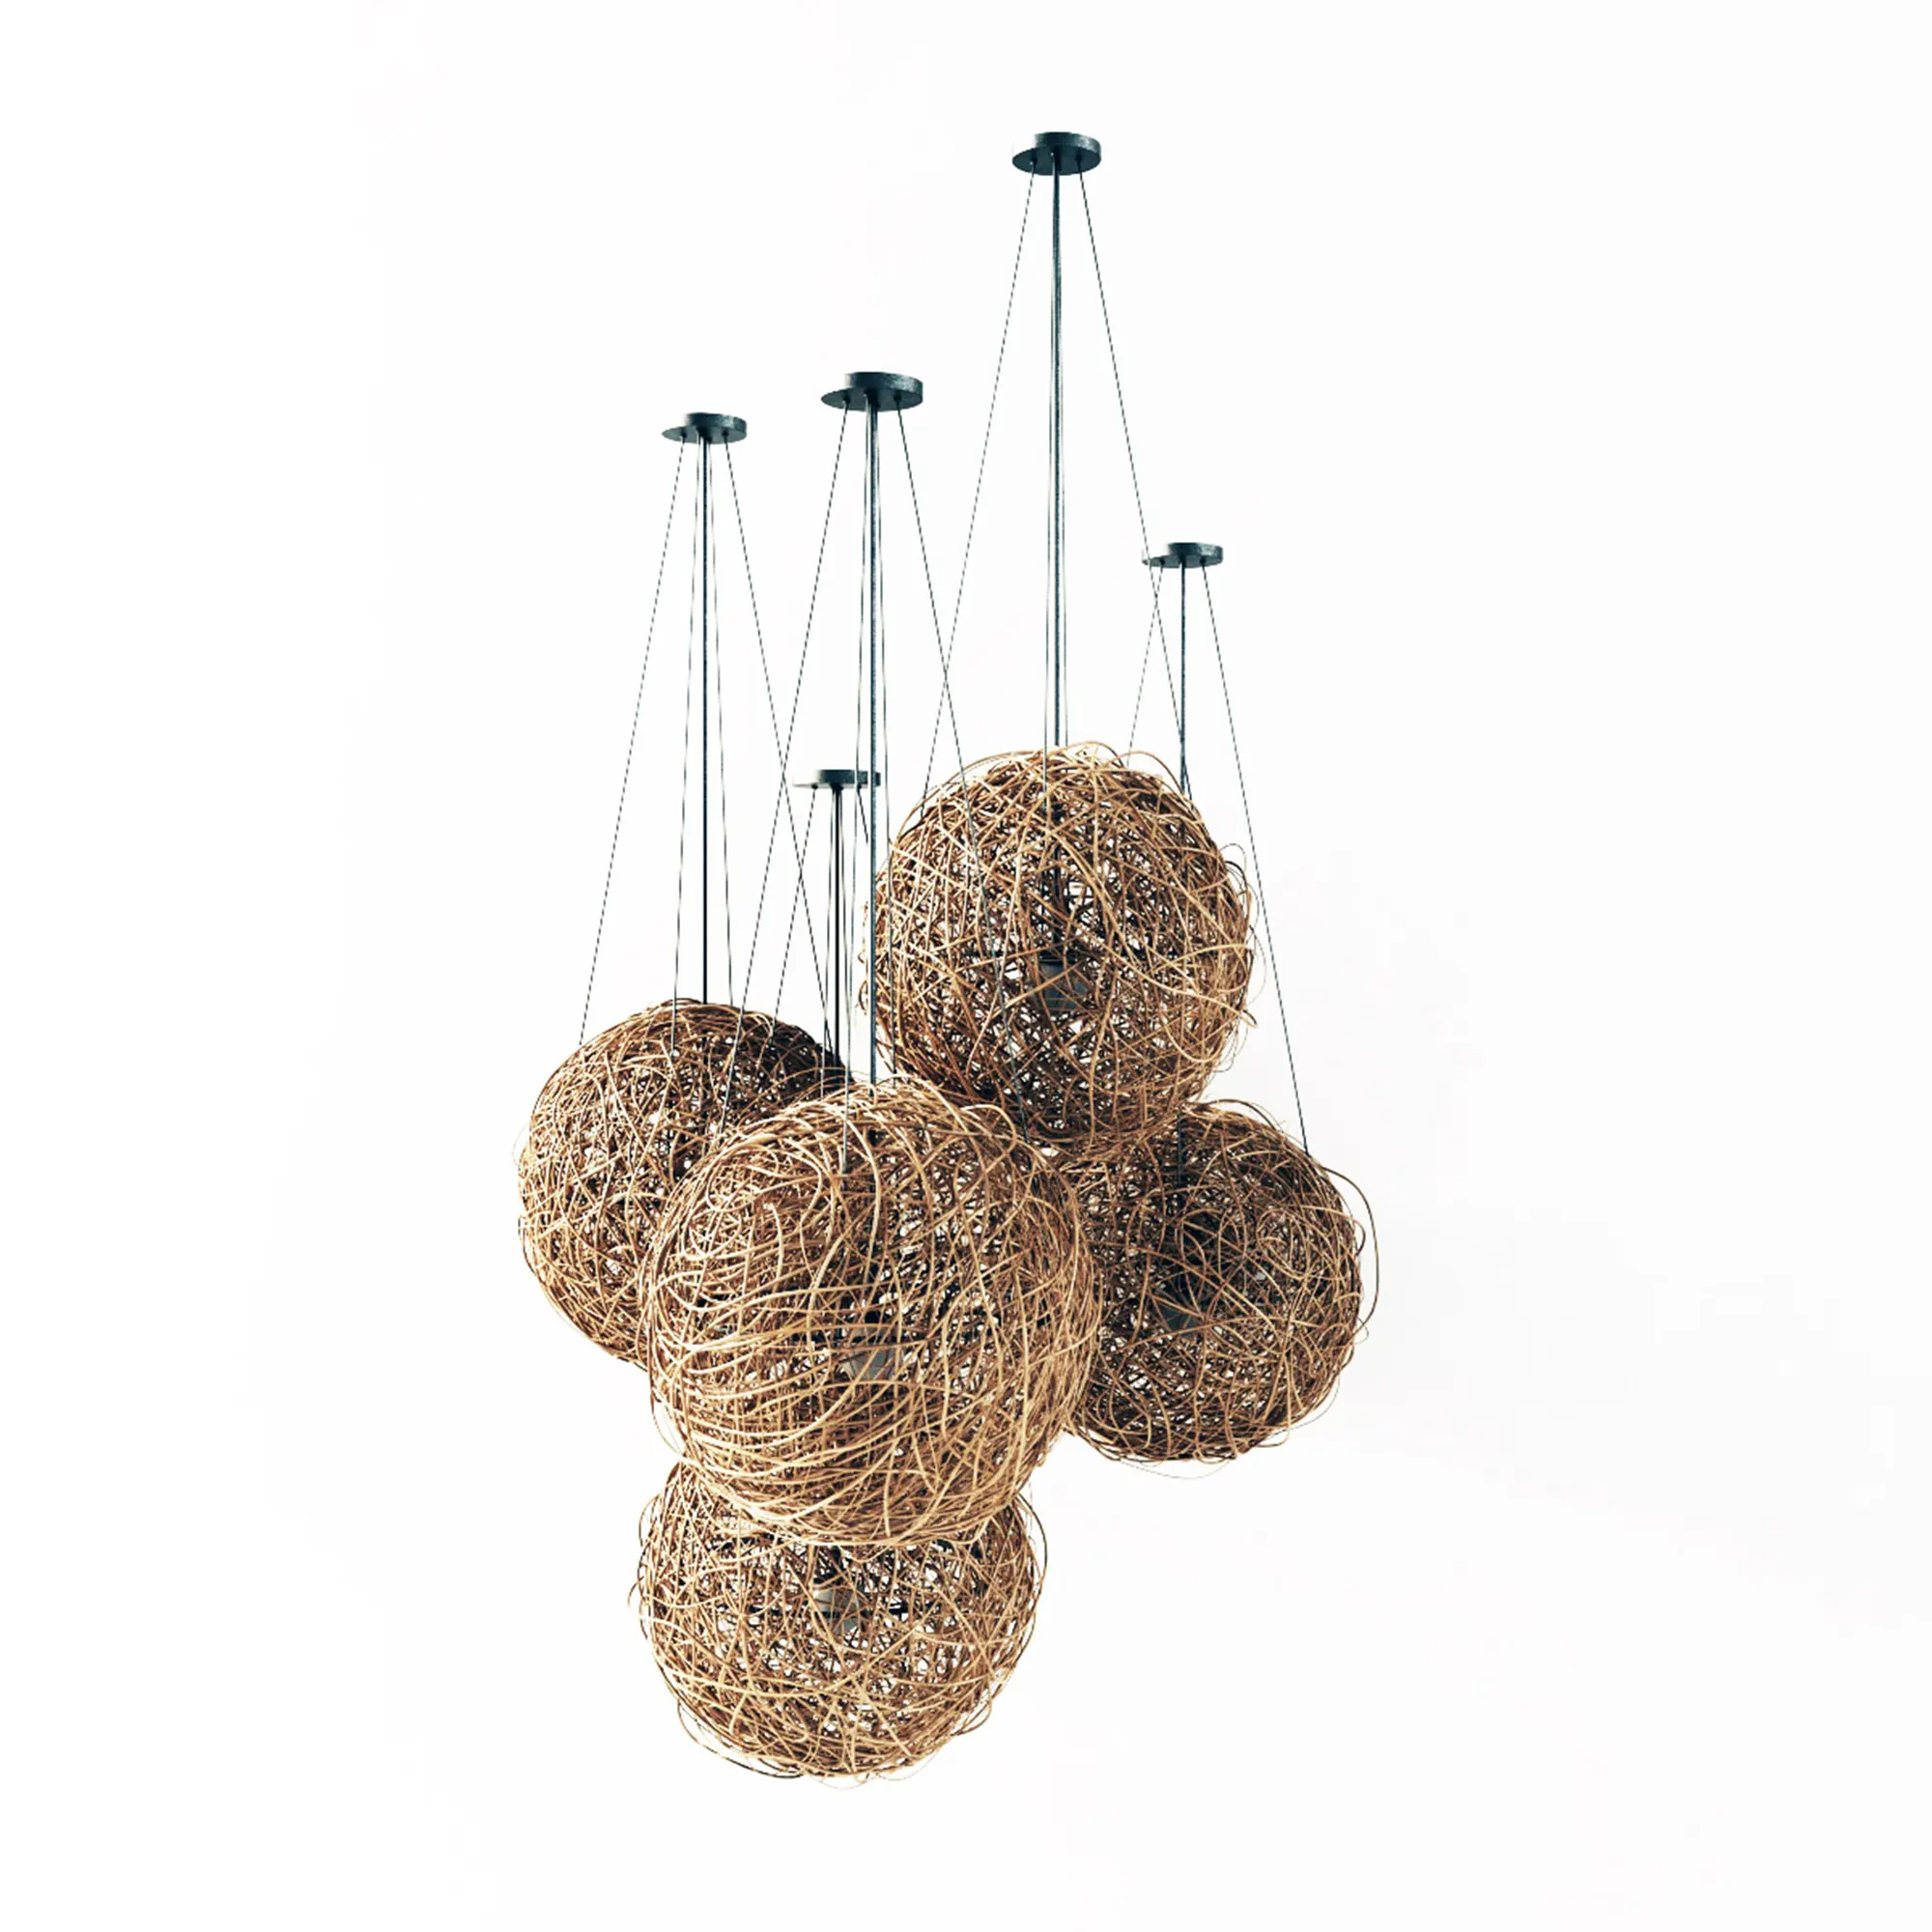 Branch decor lamp sphere N1 Cone 3D model download on cg.market 3ds max, V-Ray